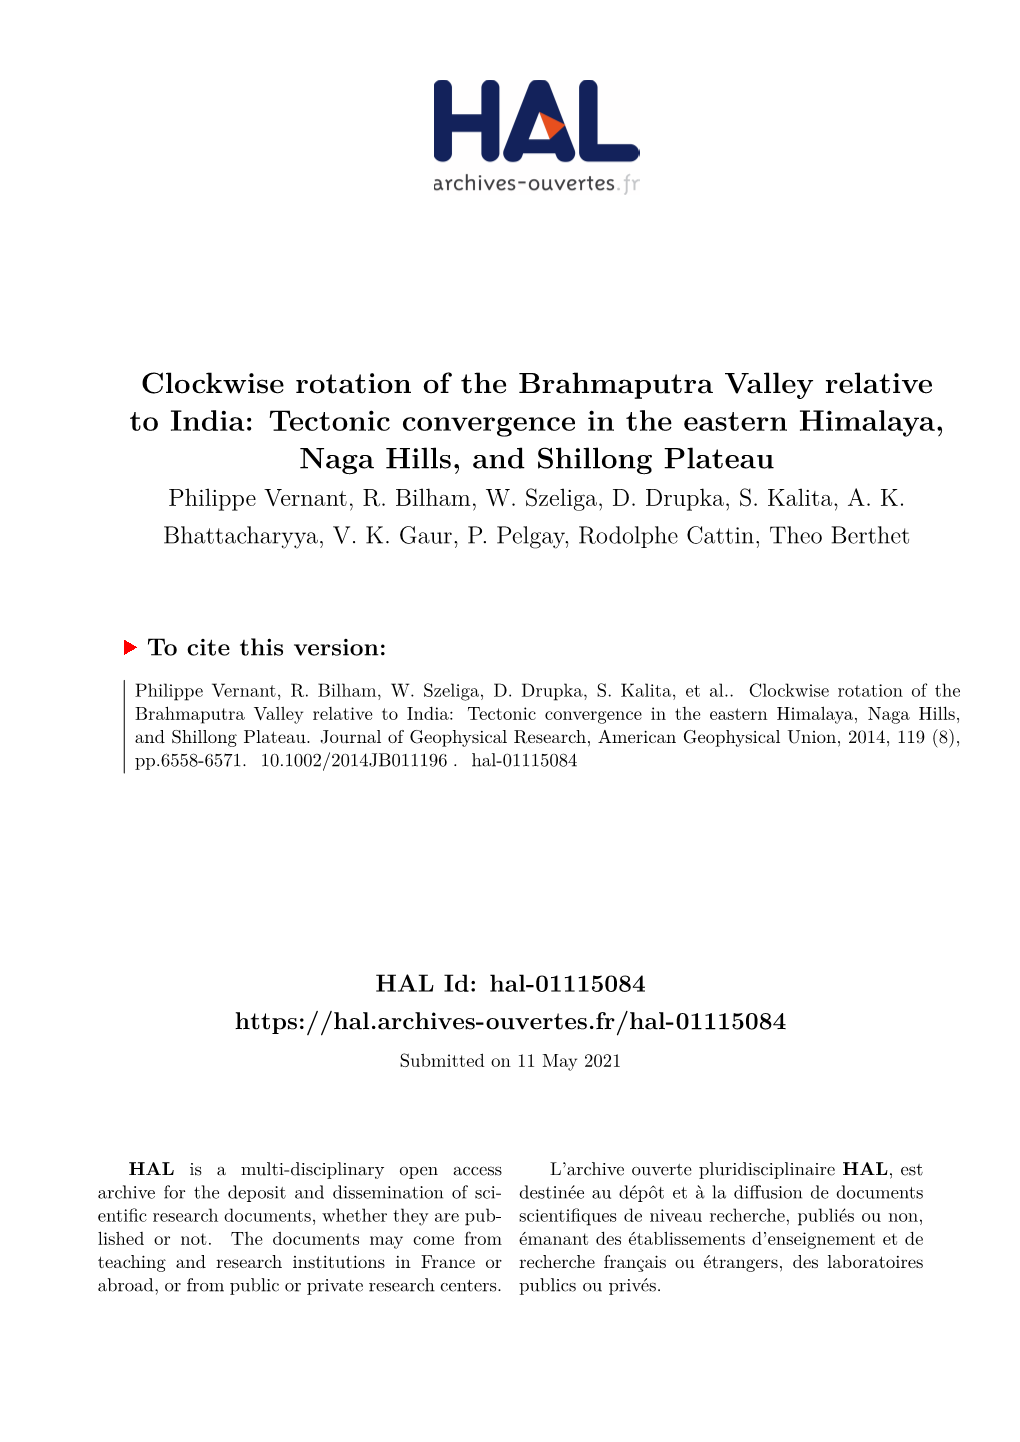 Clockwise Rotation of the Brahmaputra Valley Relative to India: Tectonic Convergence in the Eastern Himalaya, Naga Hills, and Shillong Plateau Philippe Vernant, R